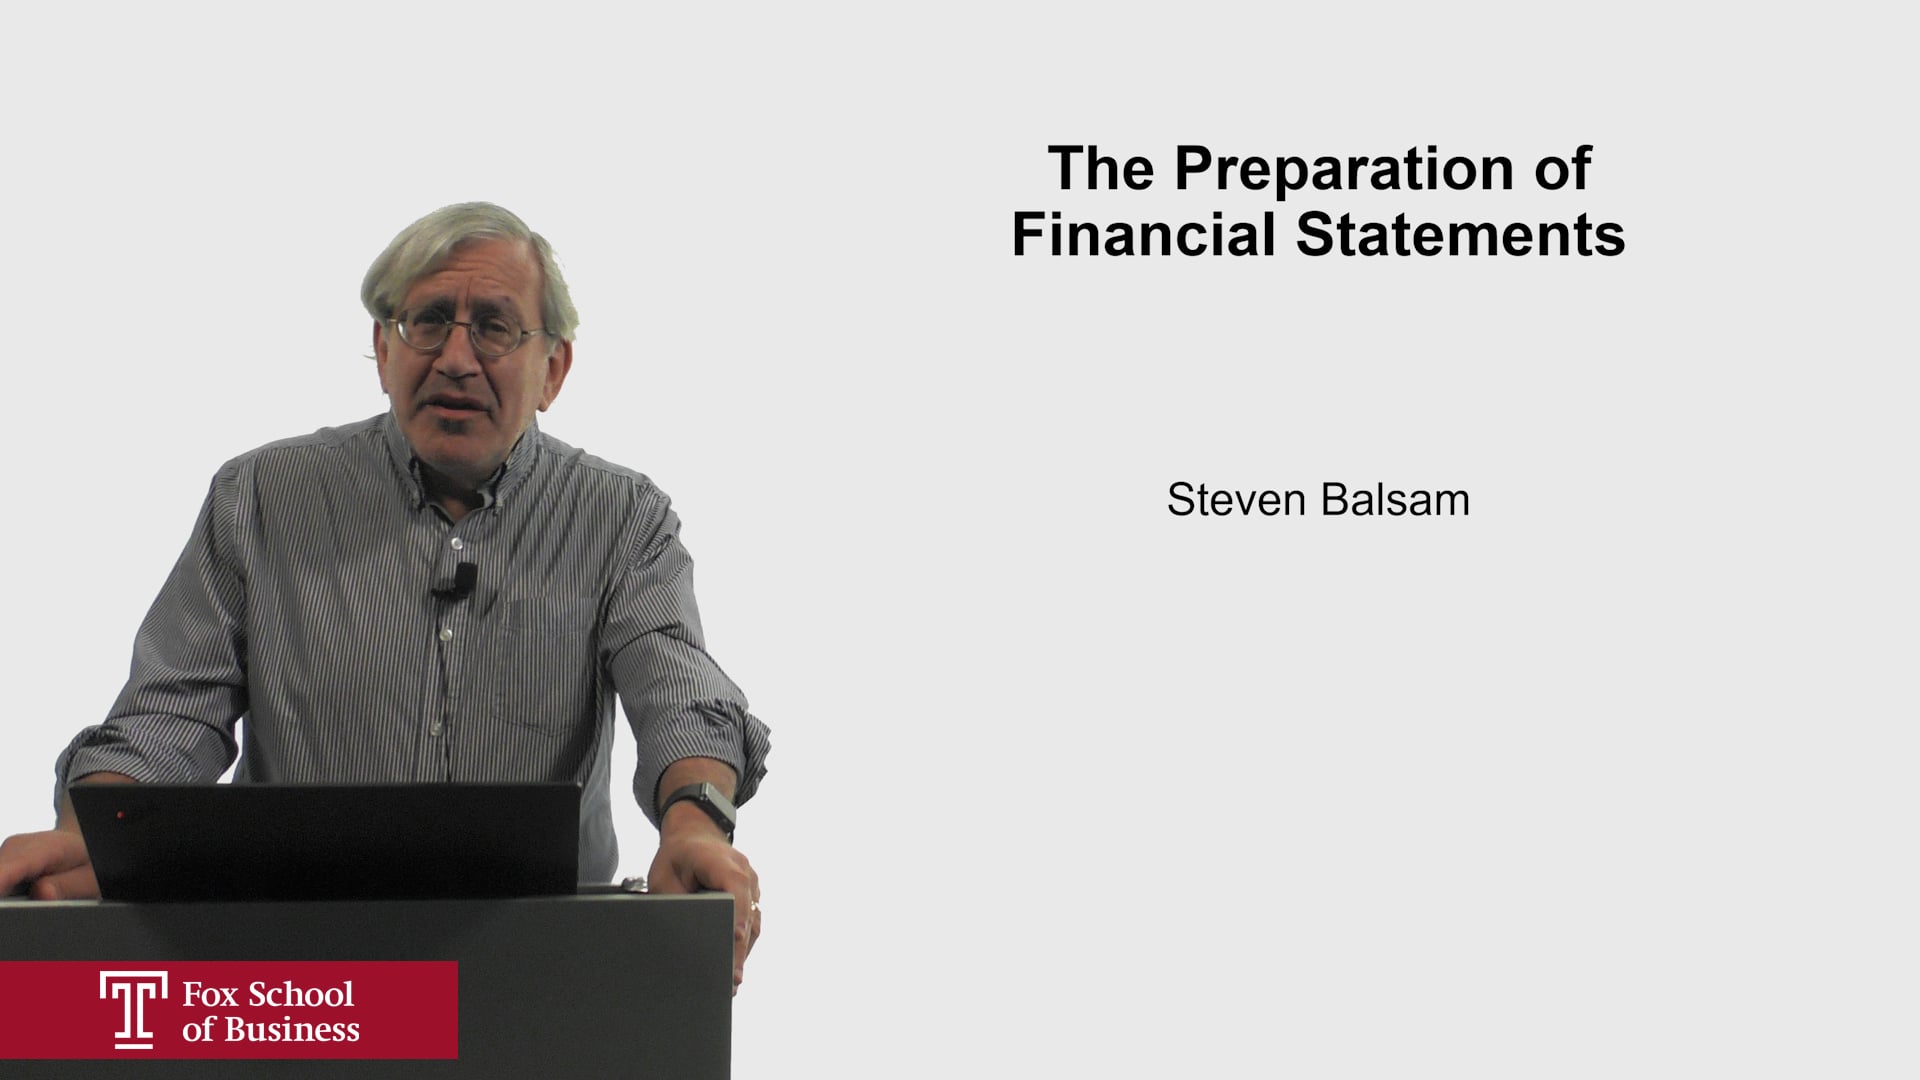 The Preparation of Financial Statements